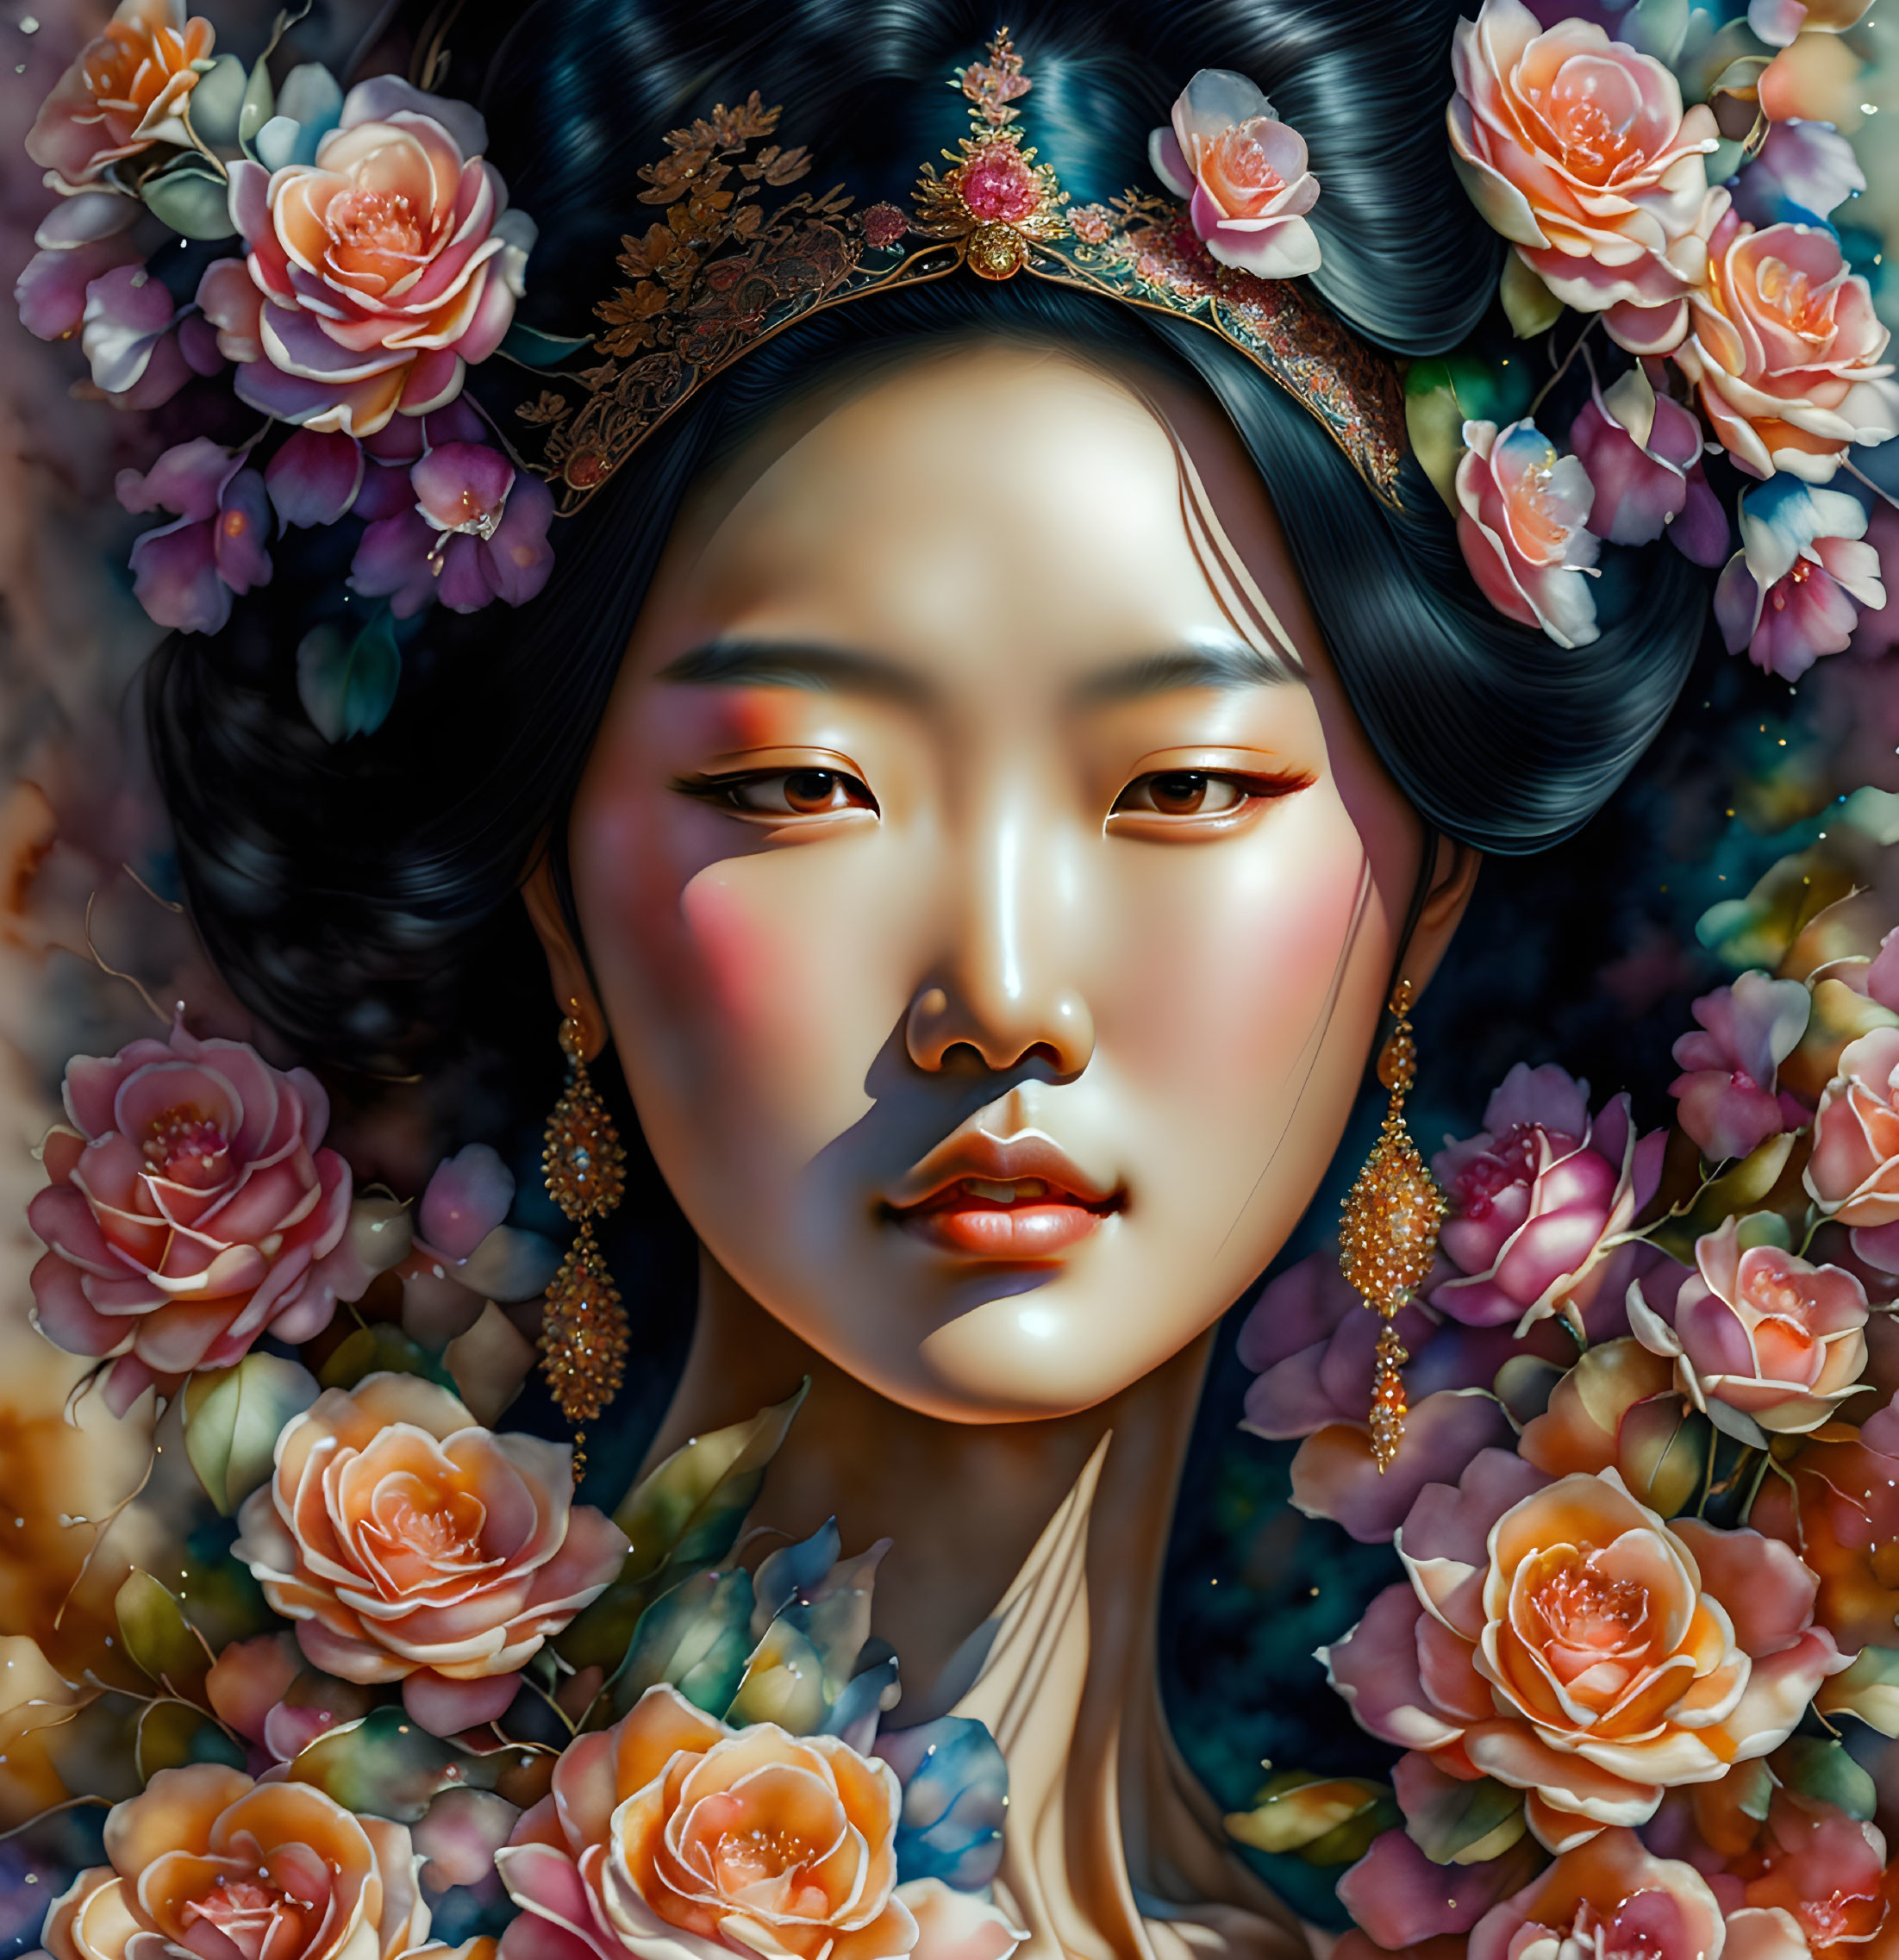 Digital artwork: Woman with East Asian features among pink and orange roses